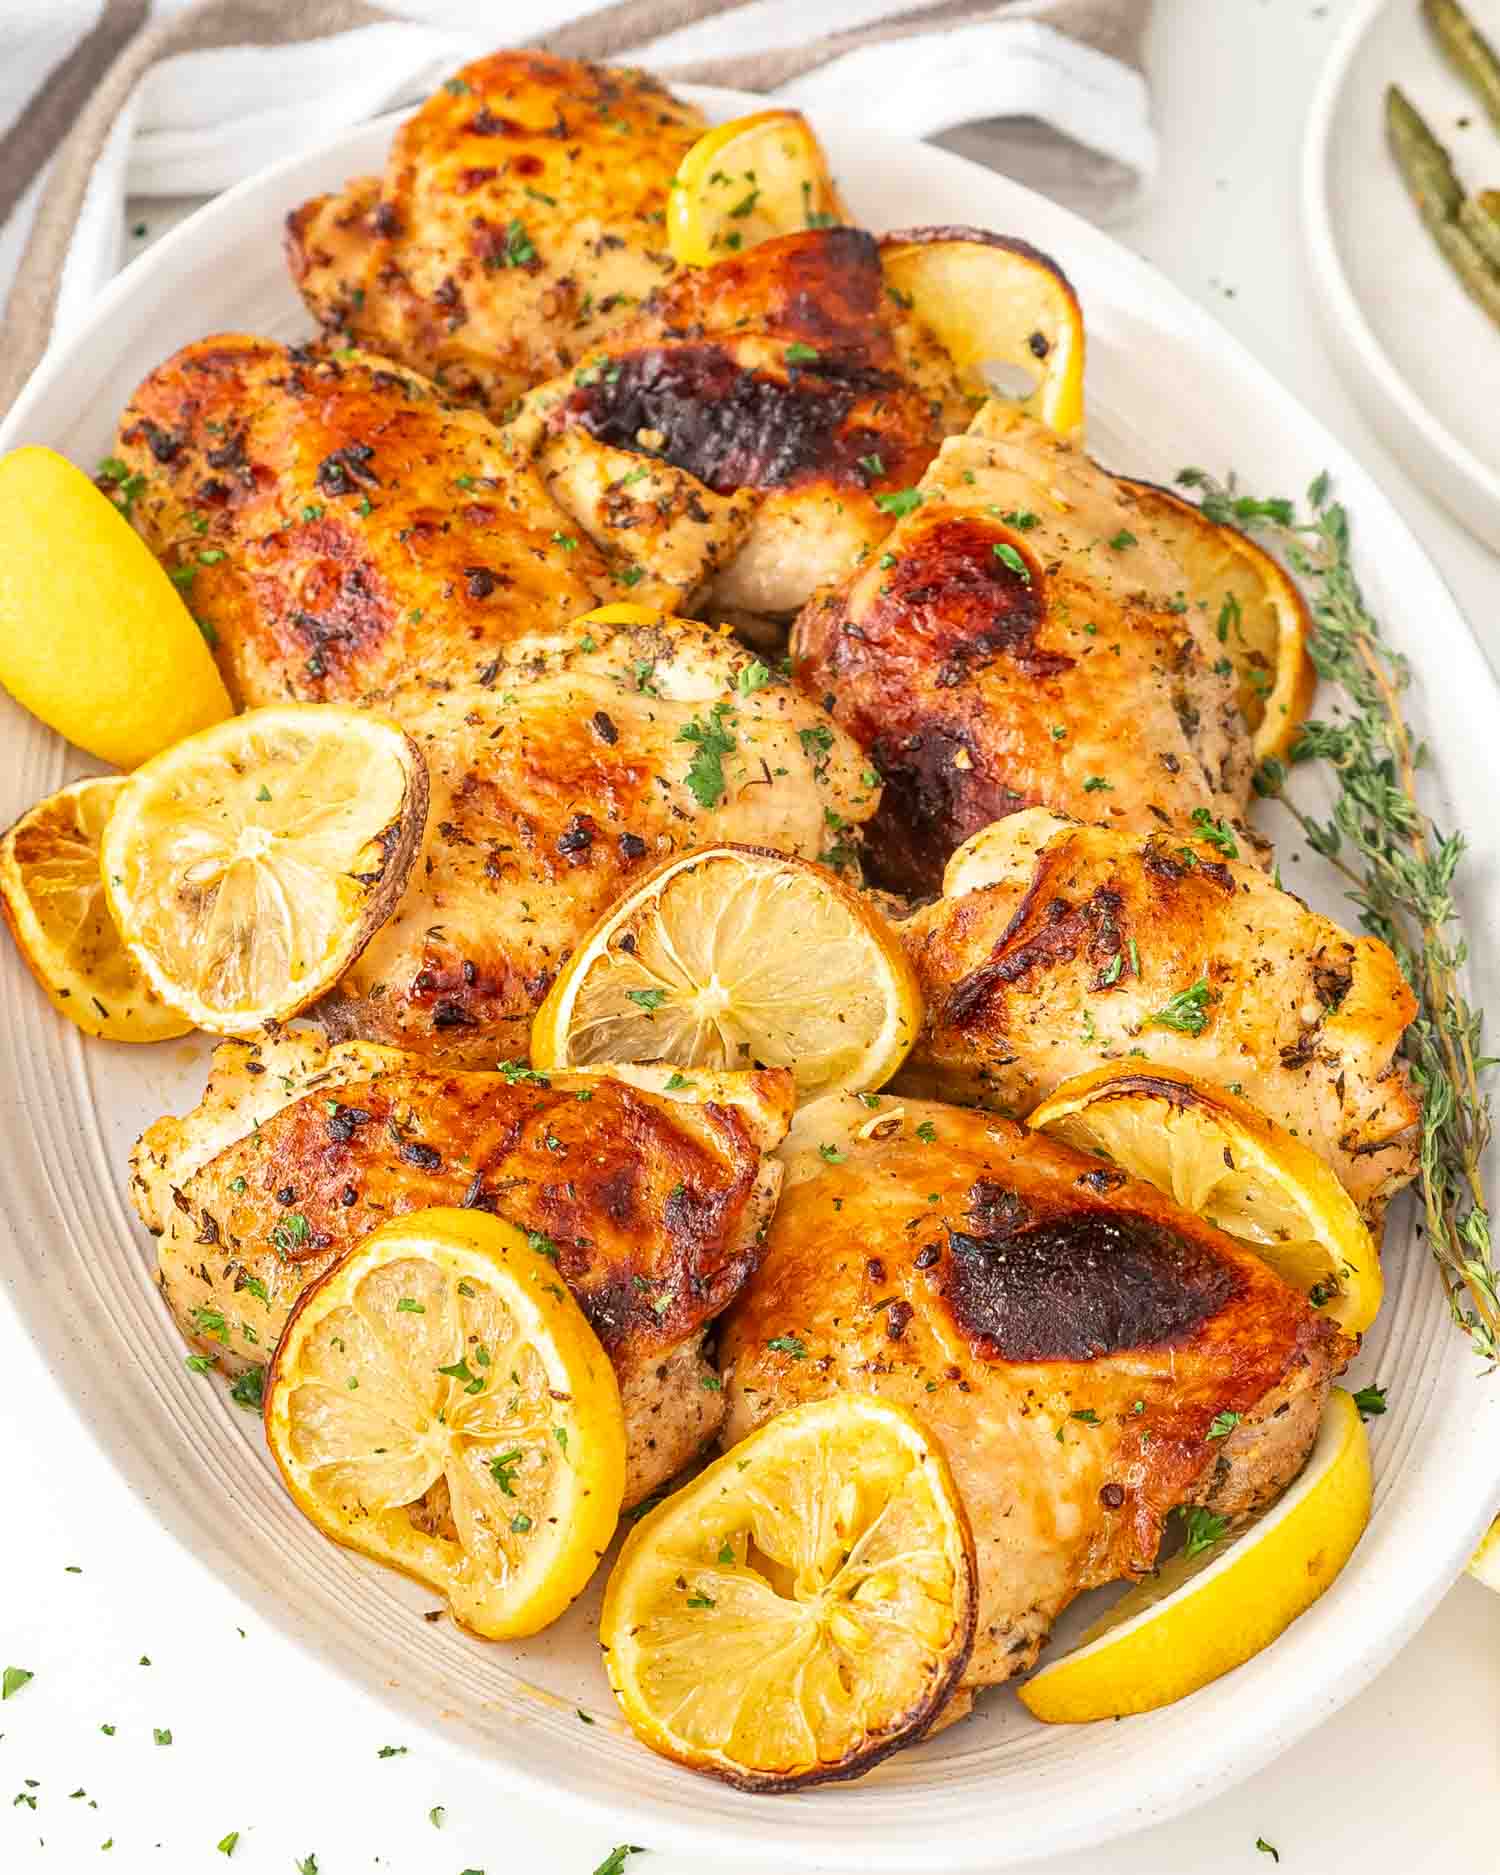 baked lemon chicken thighs on a platter garnished with lemon slices and parlsey.